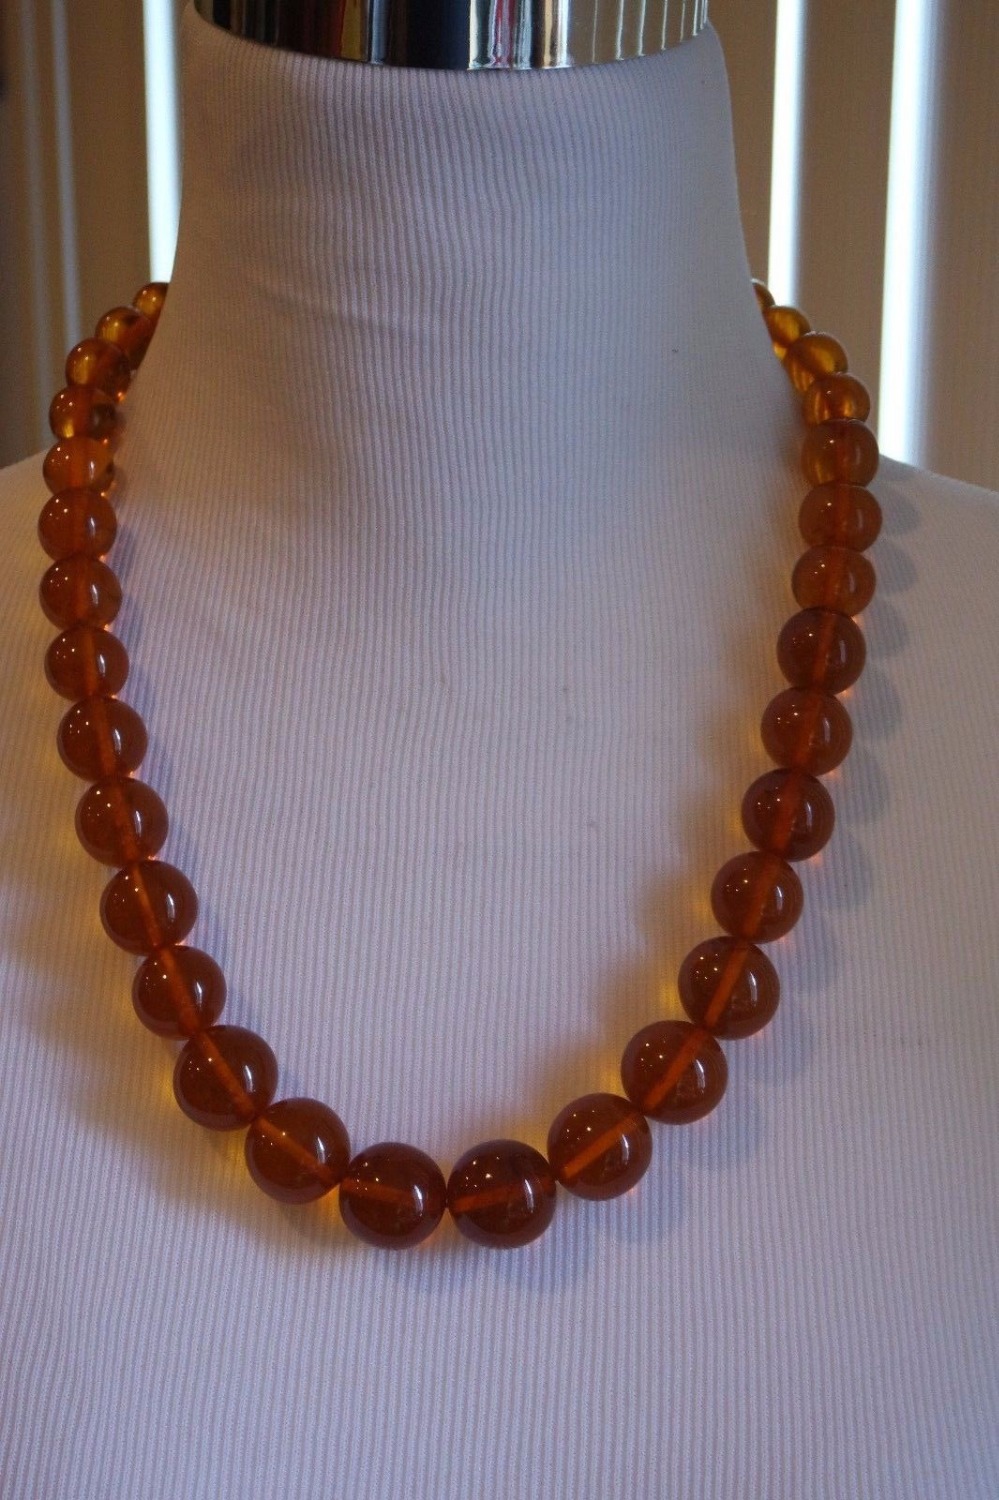 Ƽ  Ʈ  ڹ   90gr ũ 20mm /VINTAGE GENUINE BALTIC CHINESE Amber Round BEADS NECKLACE 90gr  SIZE 20mm